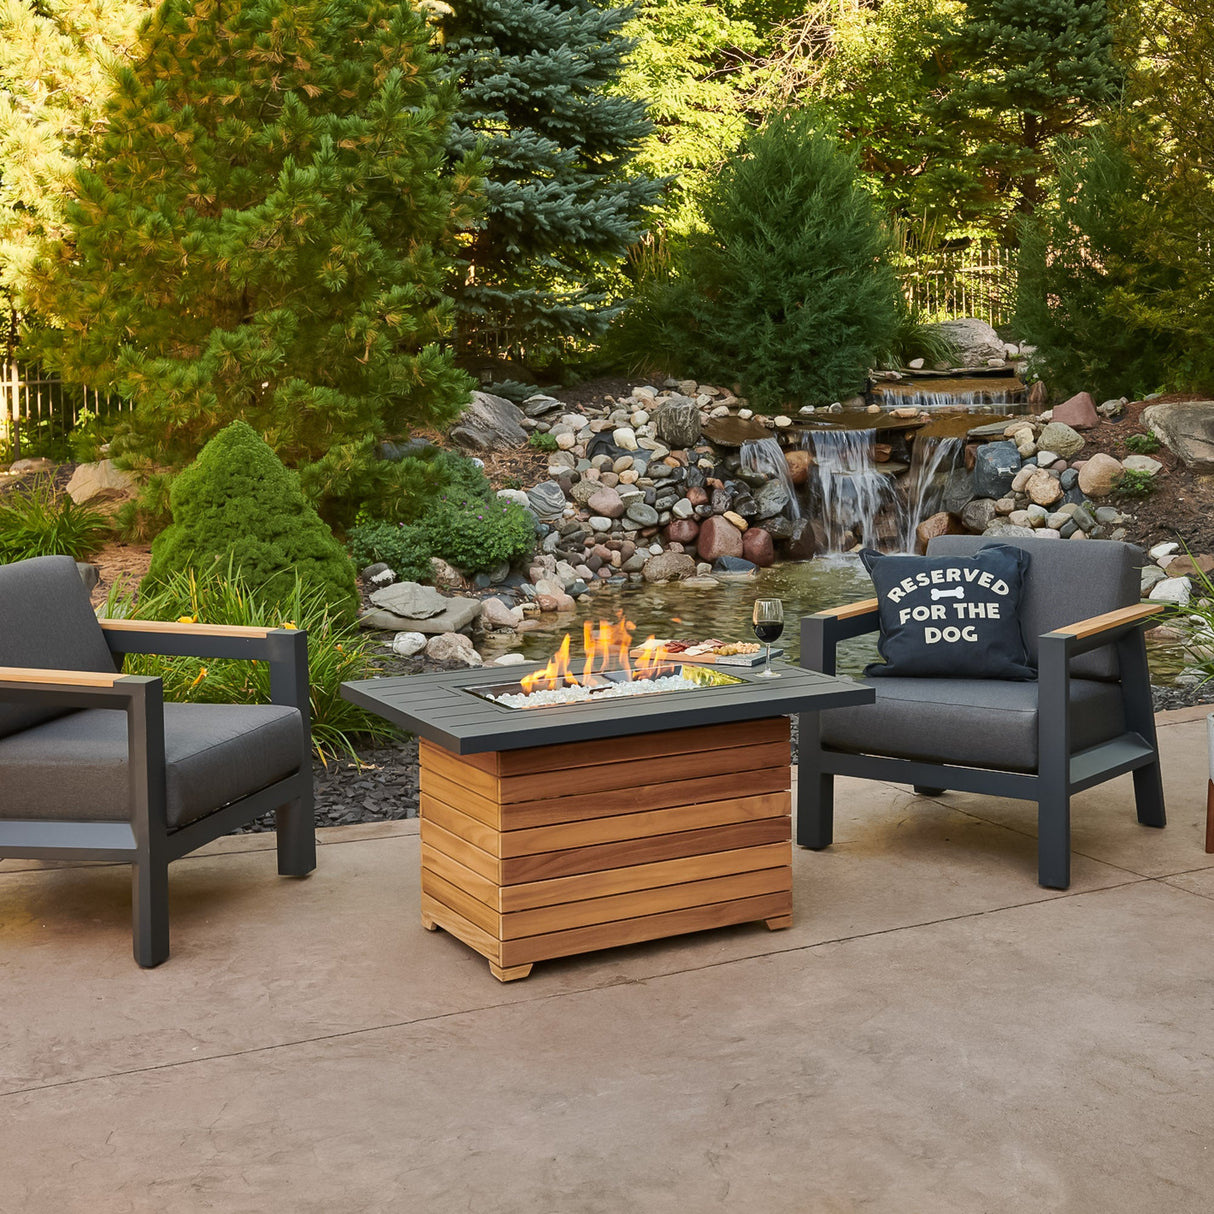 The Darien Rectangular Gas Fire Pit Table with an Aluminum top in a scenic outdoor setting with a waterfall and pine trees